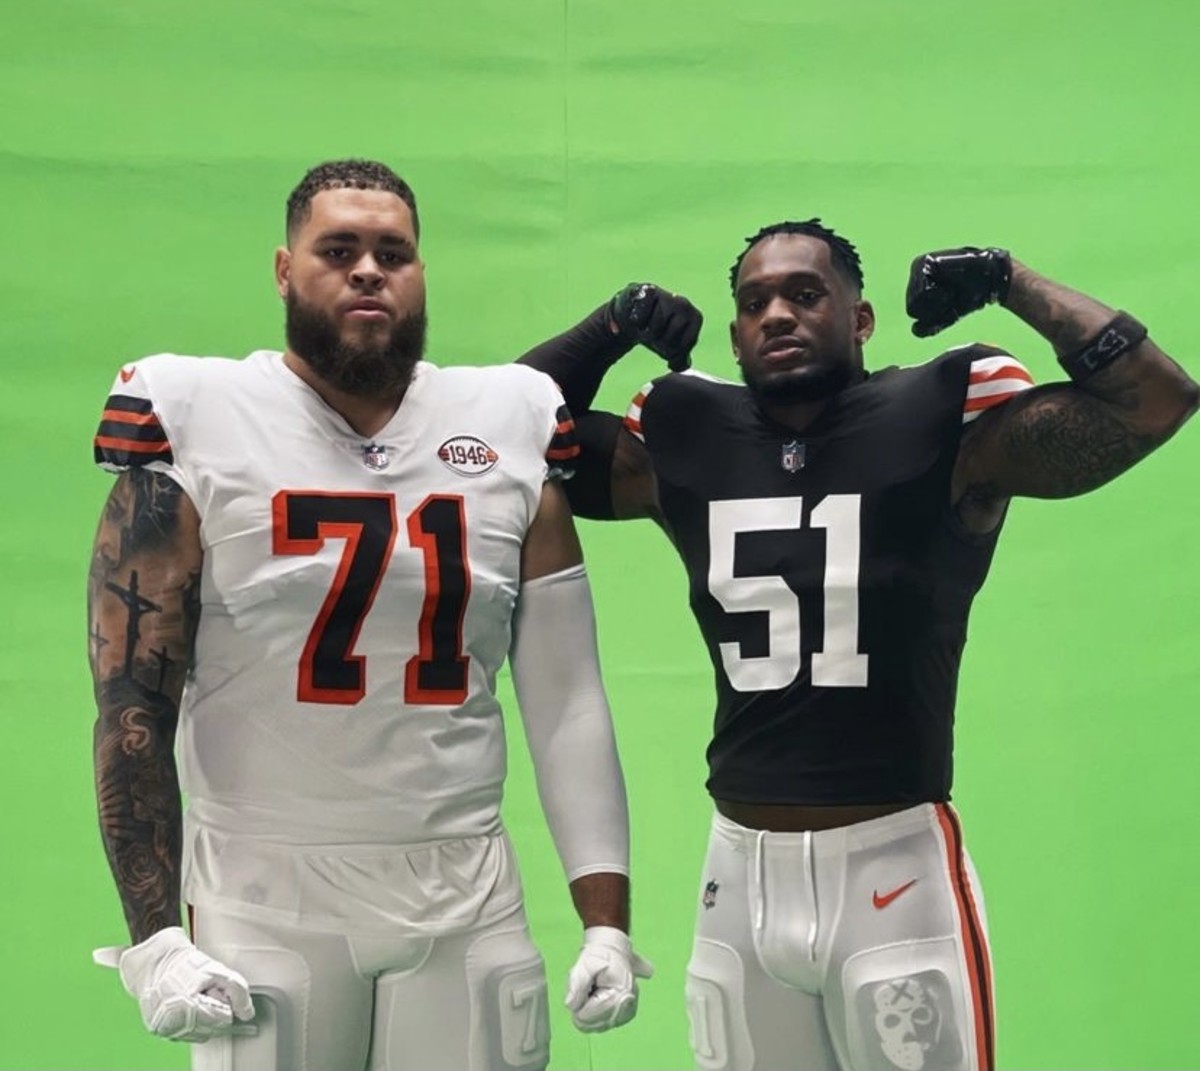 Cleveland Browns alternate uniforms pay homage to past